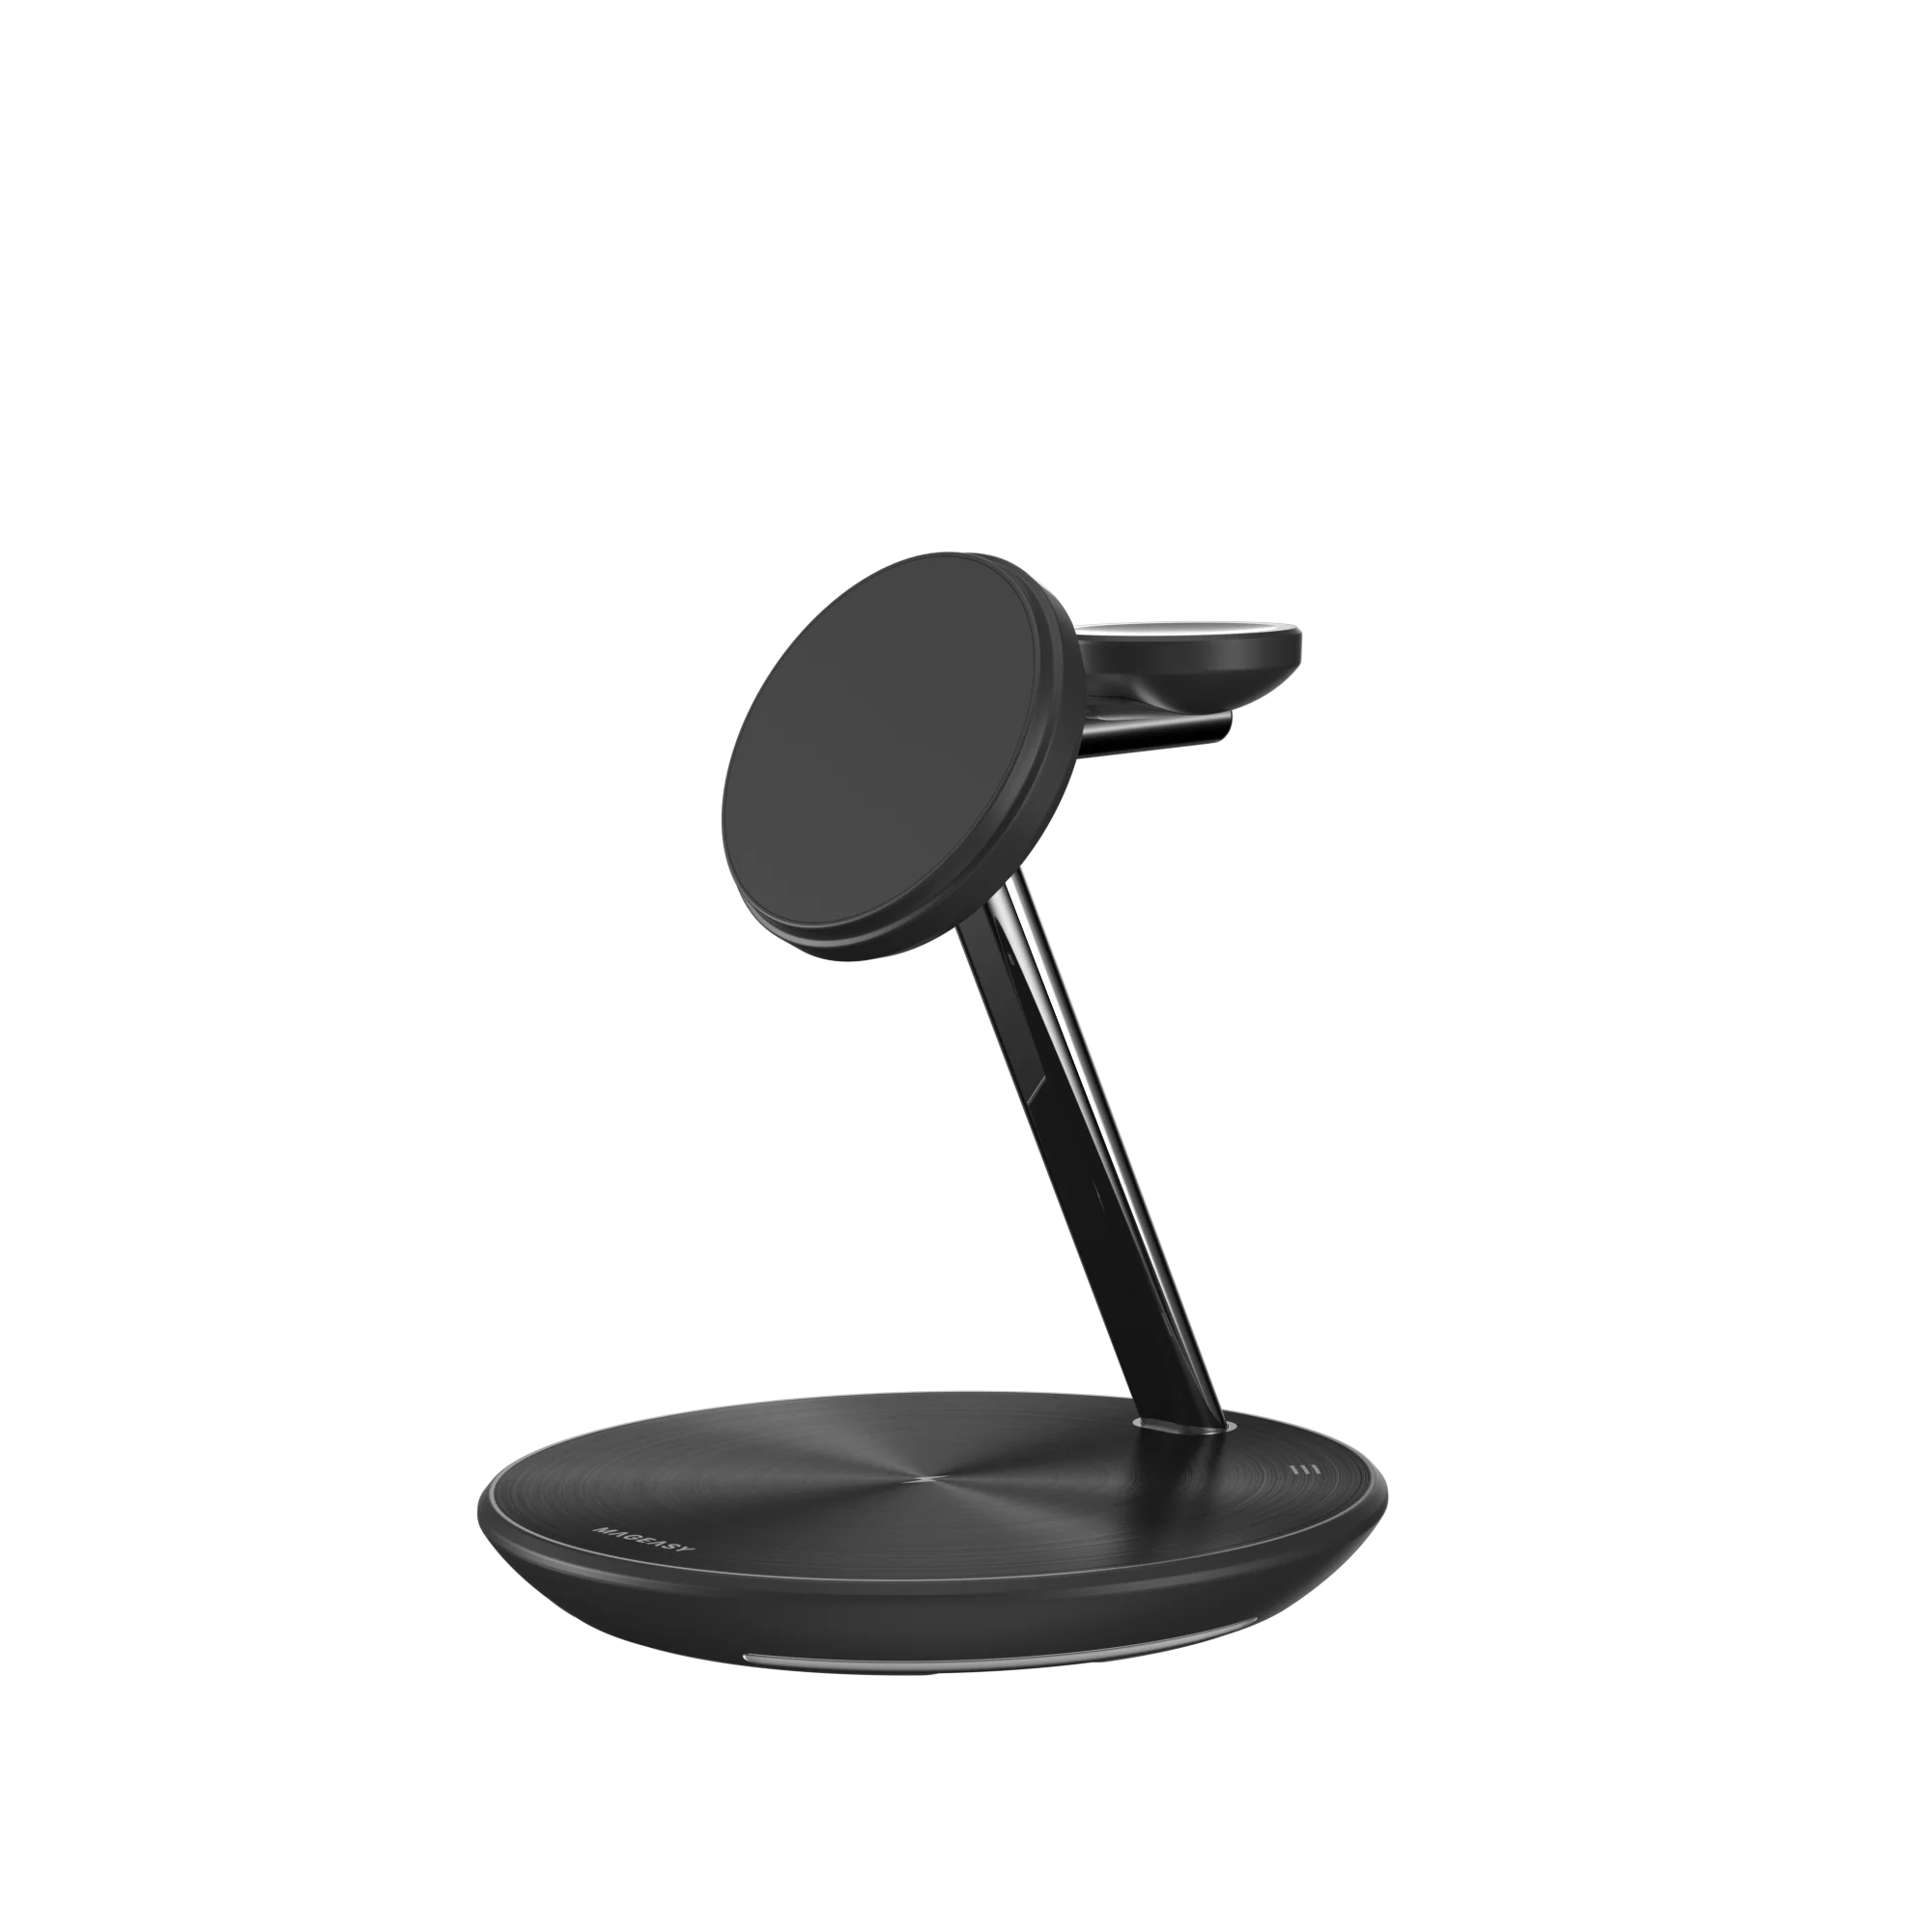 MagEasy PowerStation 5 in 1 Magnetic Wireless Charging Stand for iPhone/Apple Watch/AirPods